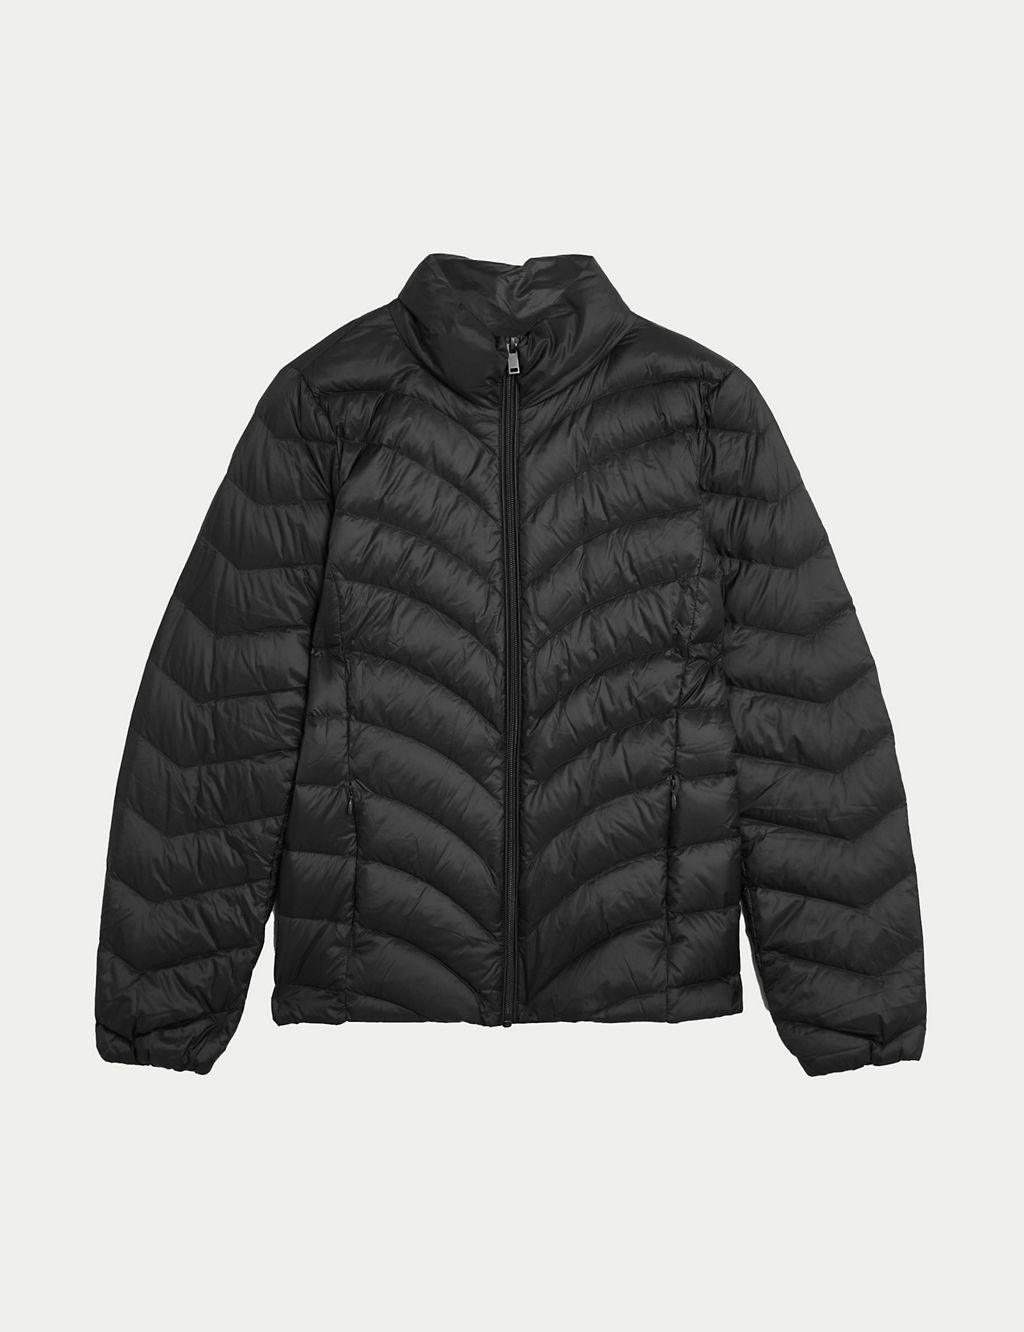 Feather & Down Packaway Puffer Jacket 1 of 7